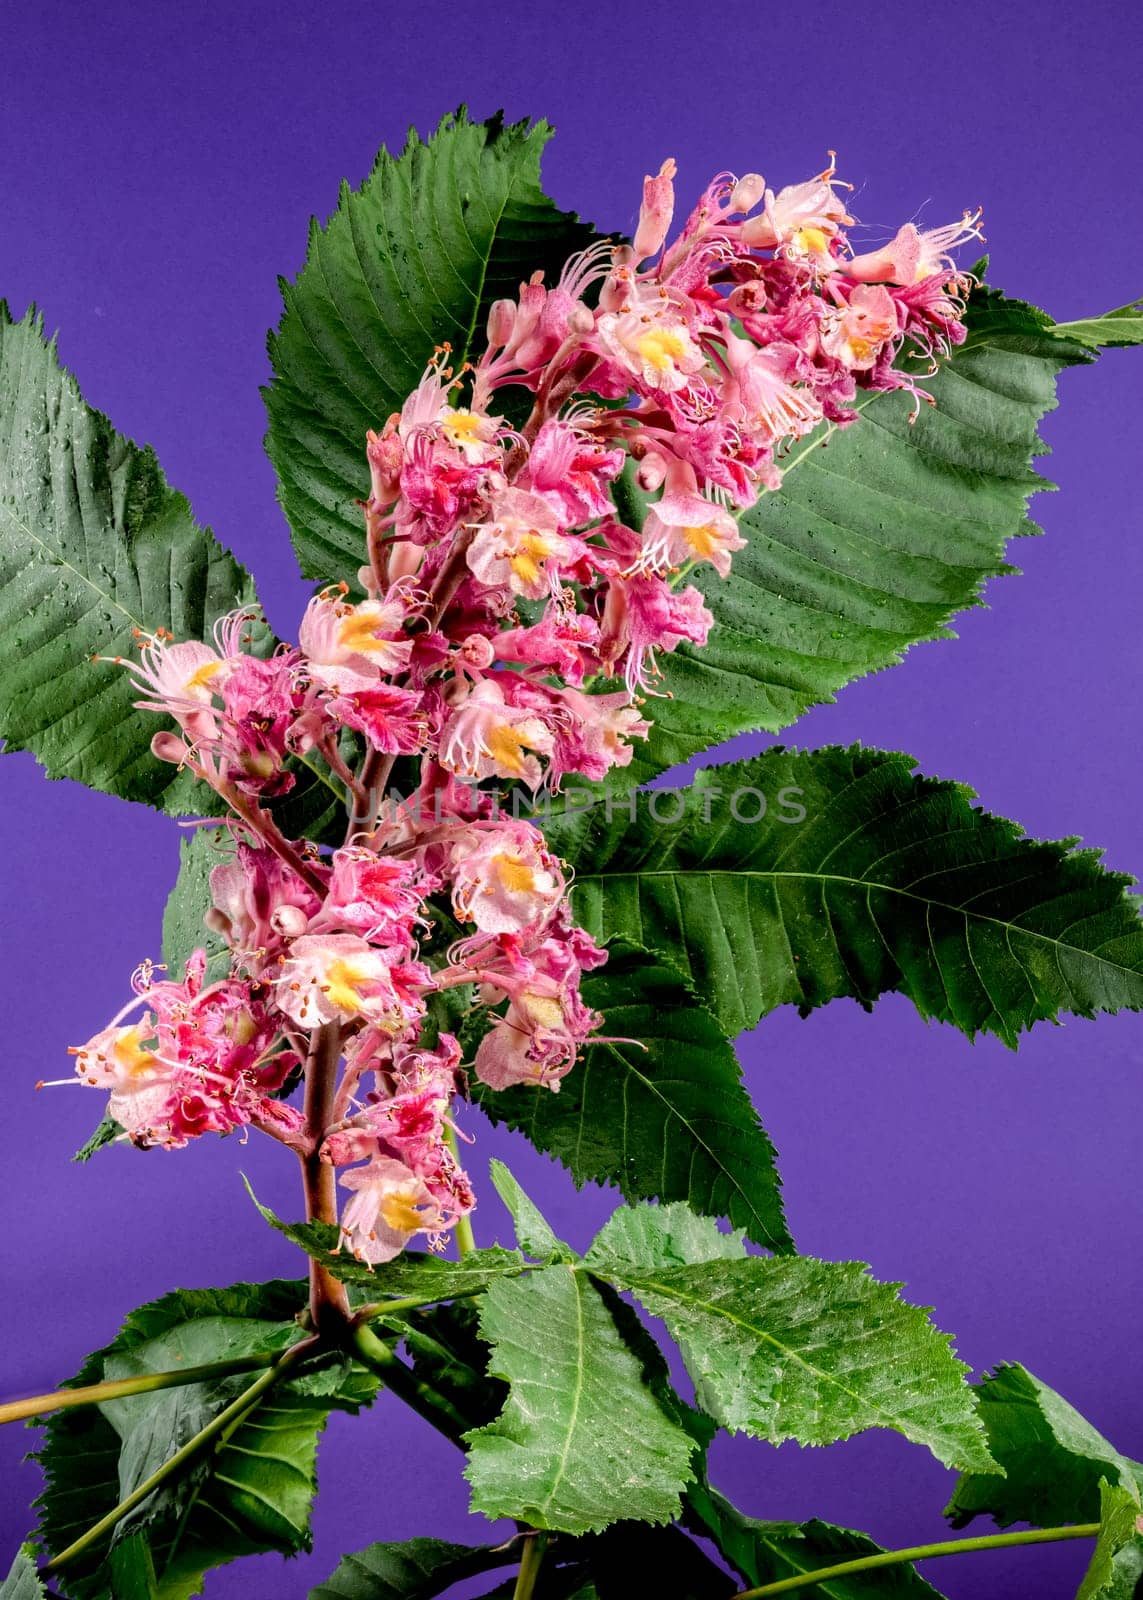 Beautiful Blooming red horse-chestnut on a purple background. Flower head close-up.